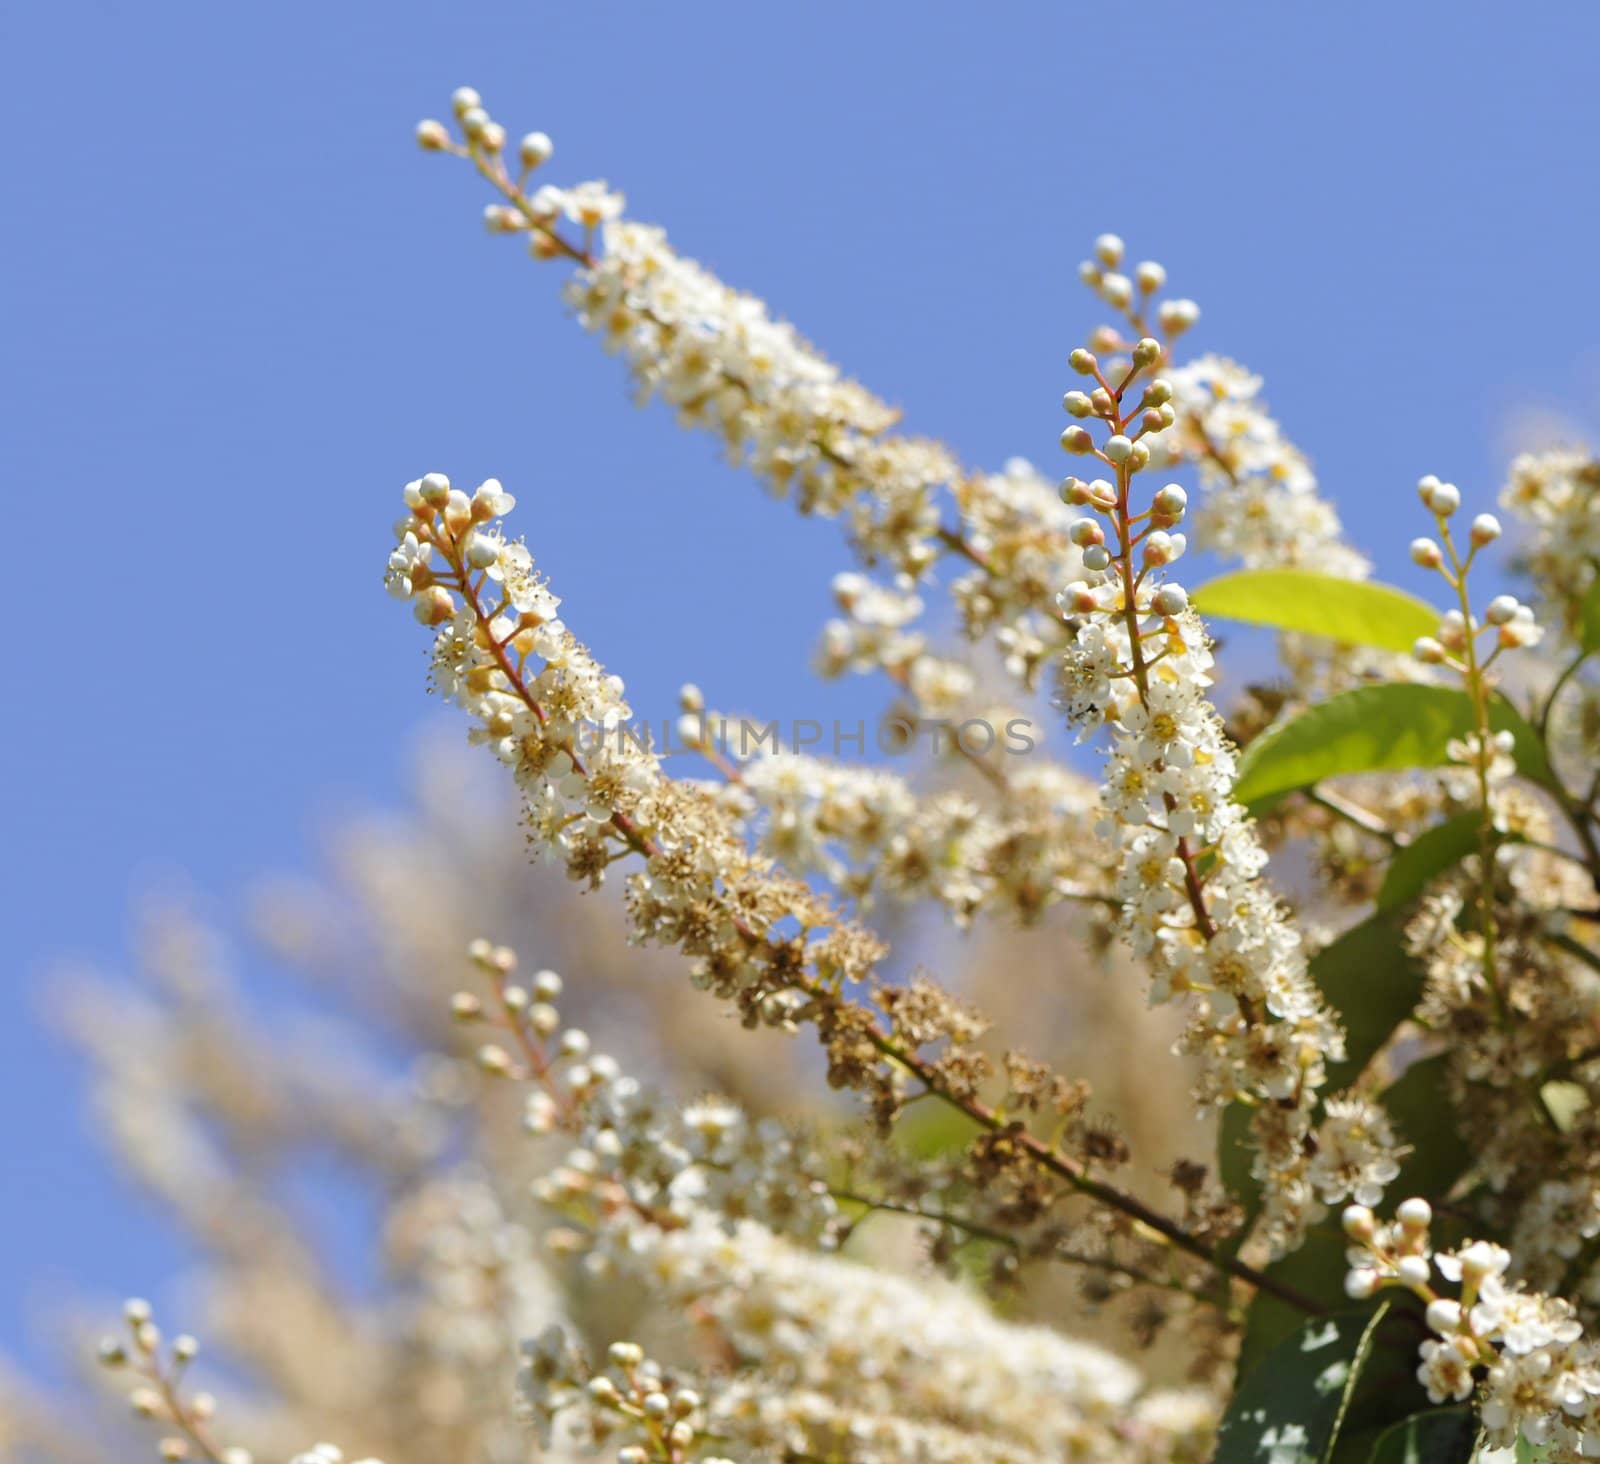 Many little white flowers and buds in a big bush with a blue sky